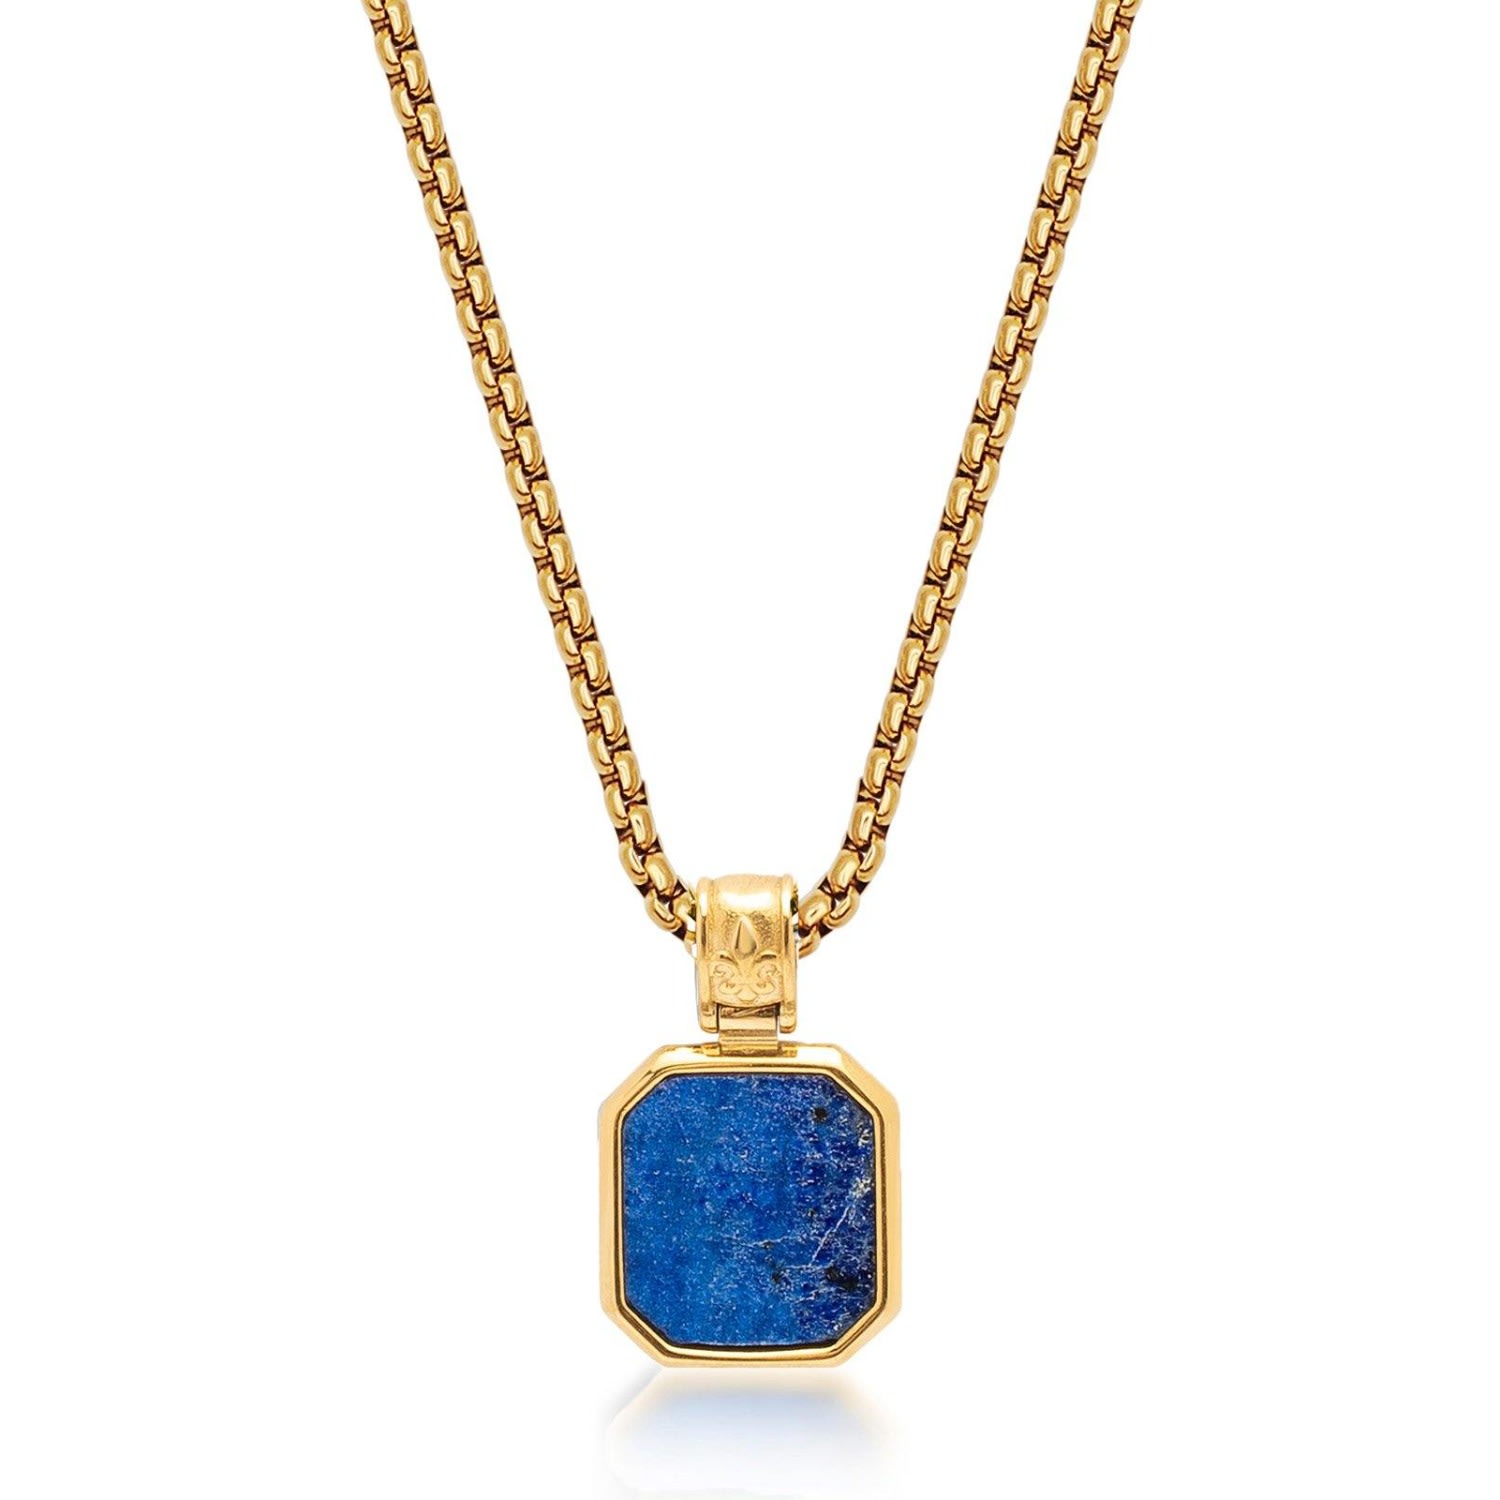 Men's Gold / Blue Gold Necklace With Square Blue Lapis Pendant Nialaya Jewelry